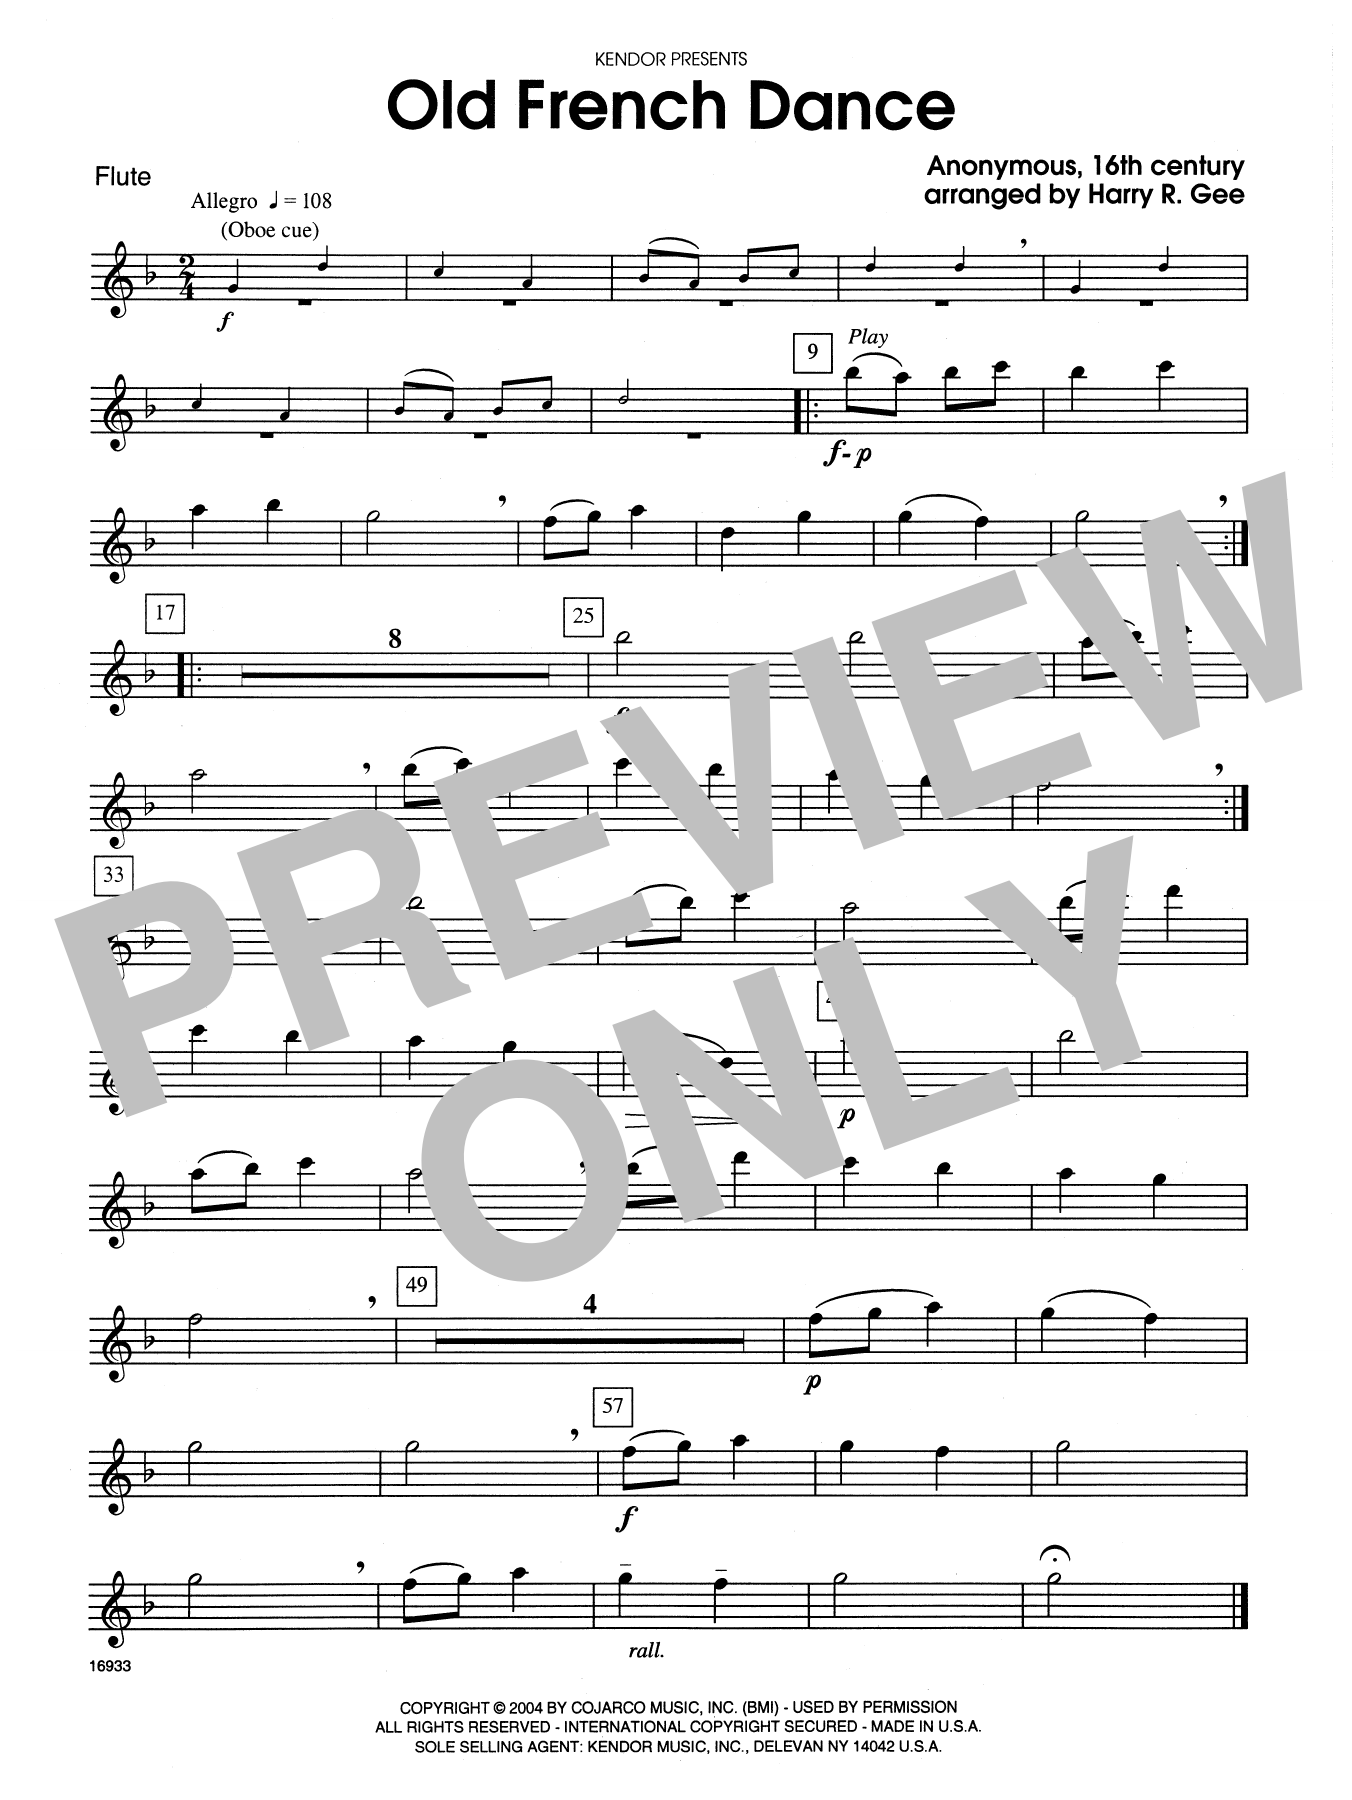 Harry R. Gee Old French Dance - Flute sheet music notes and chords. Download Printable PDF.